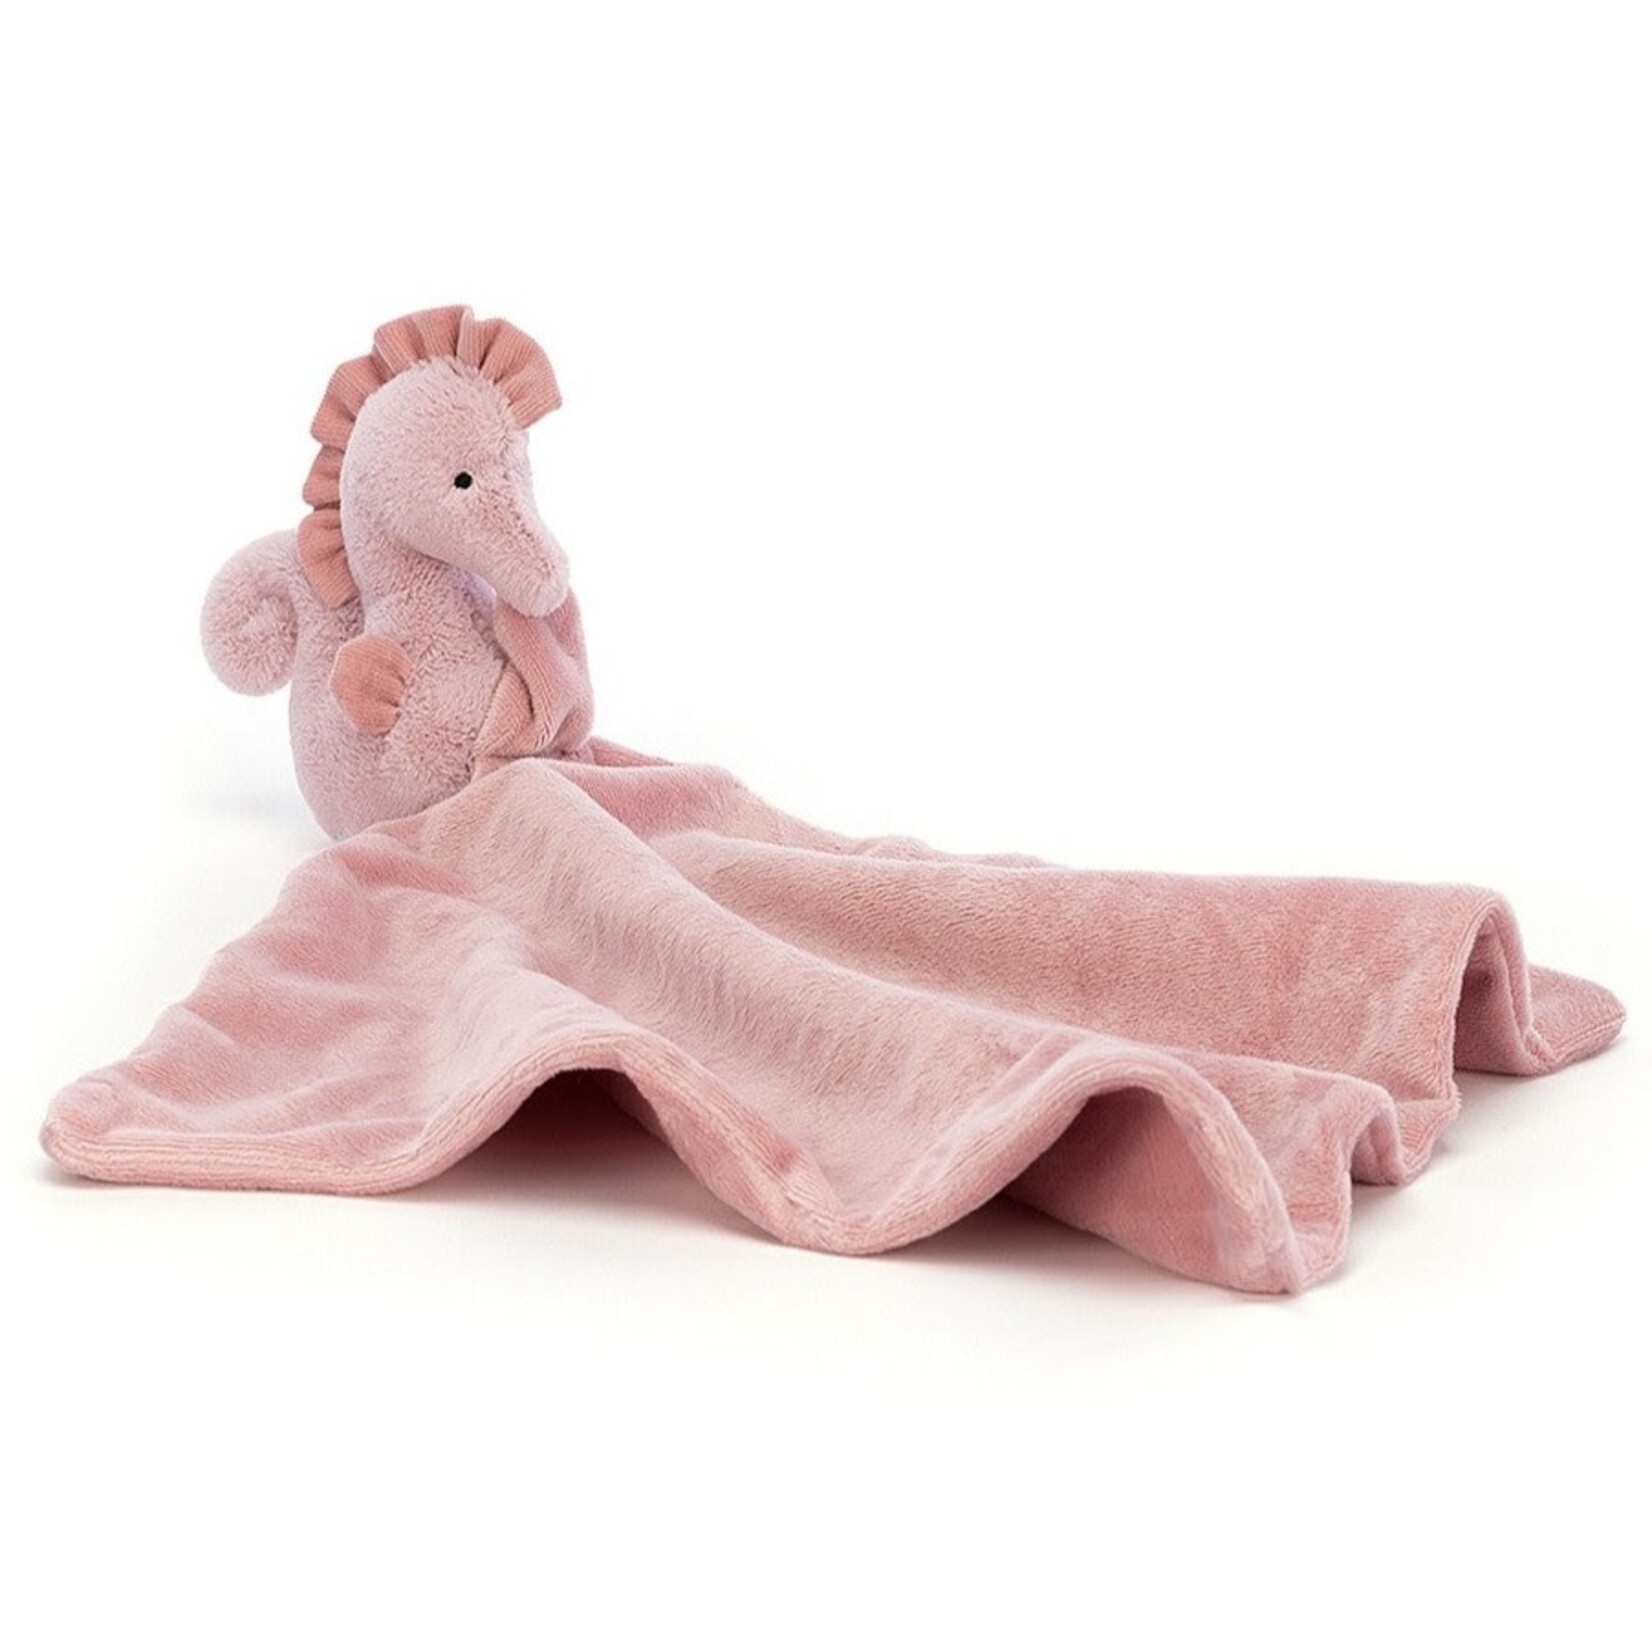 JELLYCAT SIENNA SEAHORSE SOOTHER